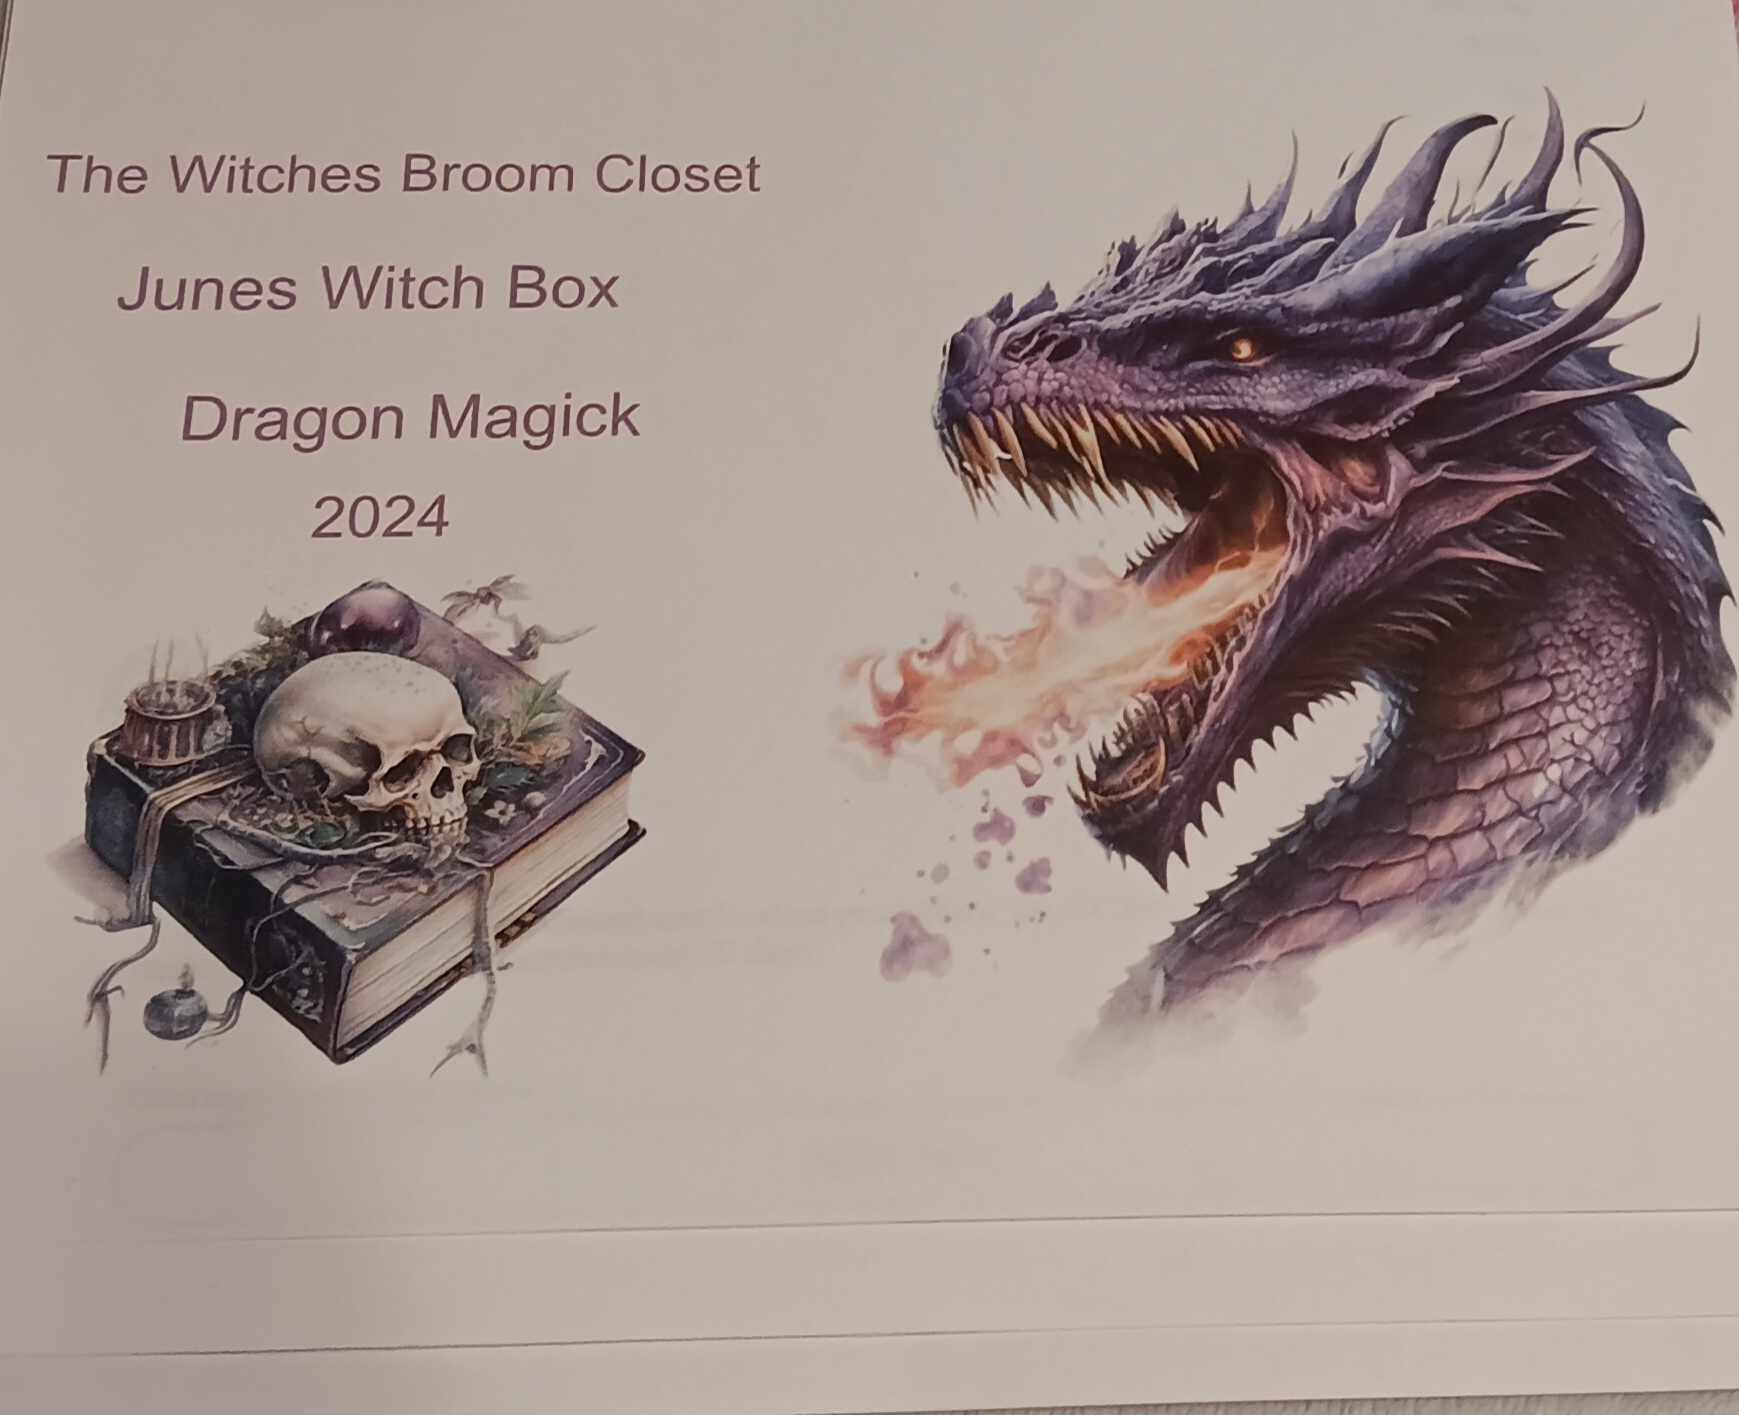 The Witches Broom Closet Witch Box *PRE-ORDER* (June 2024) Dragon Magick Witch Box - Click Image to Close